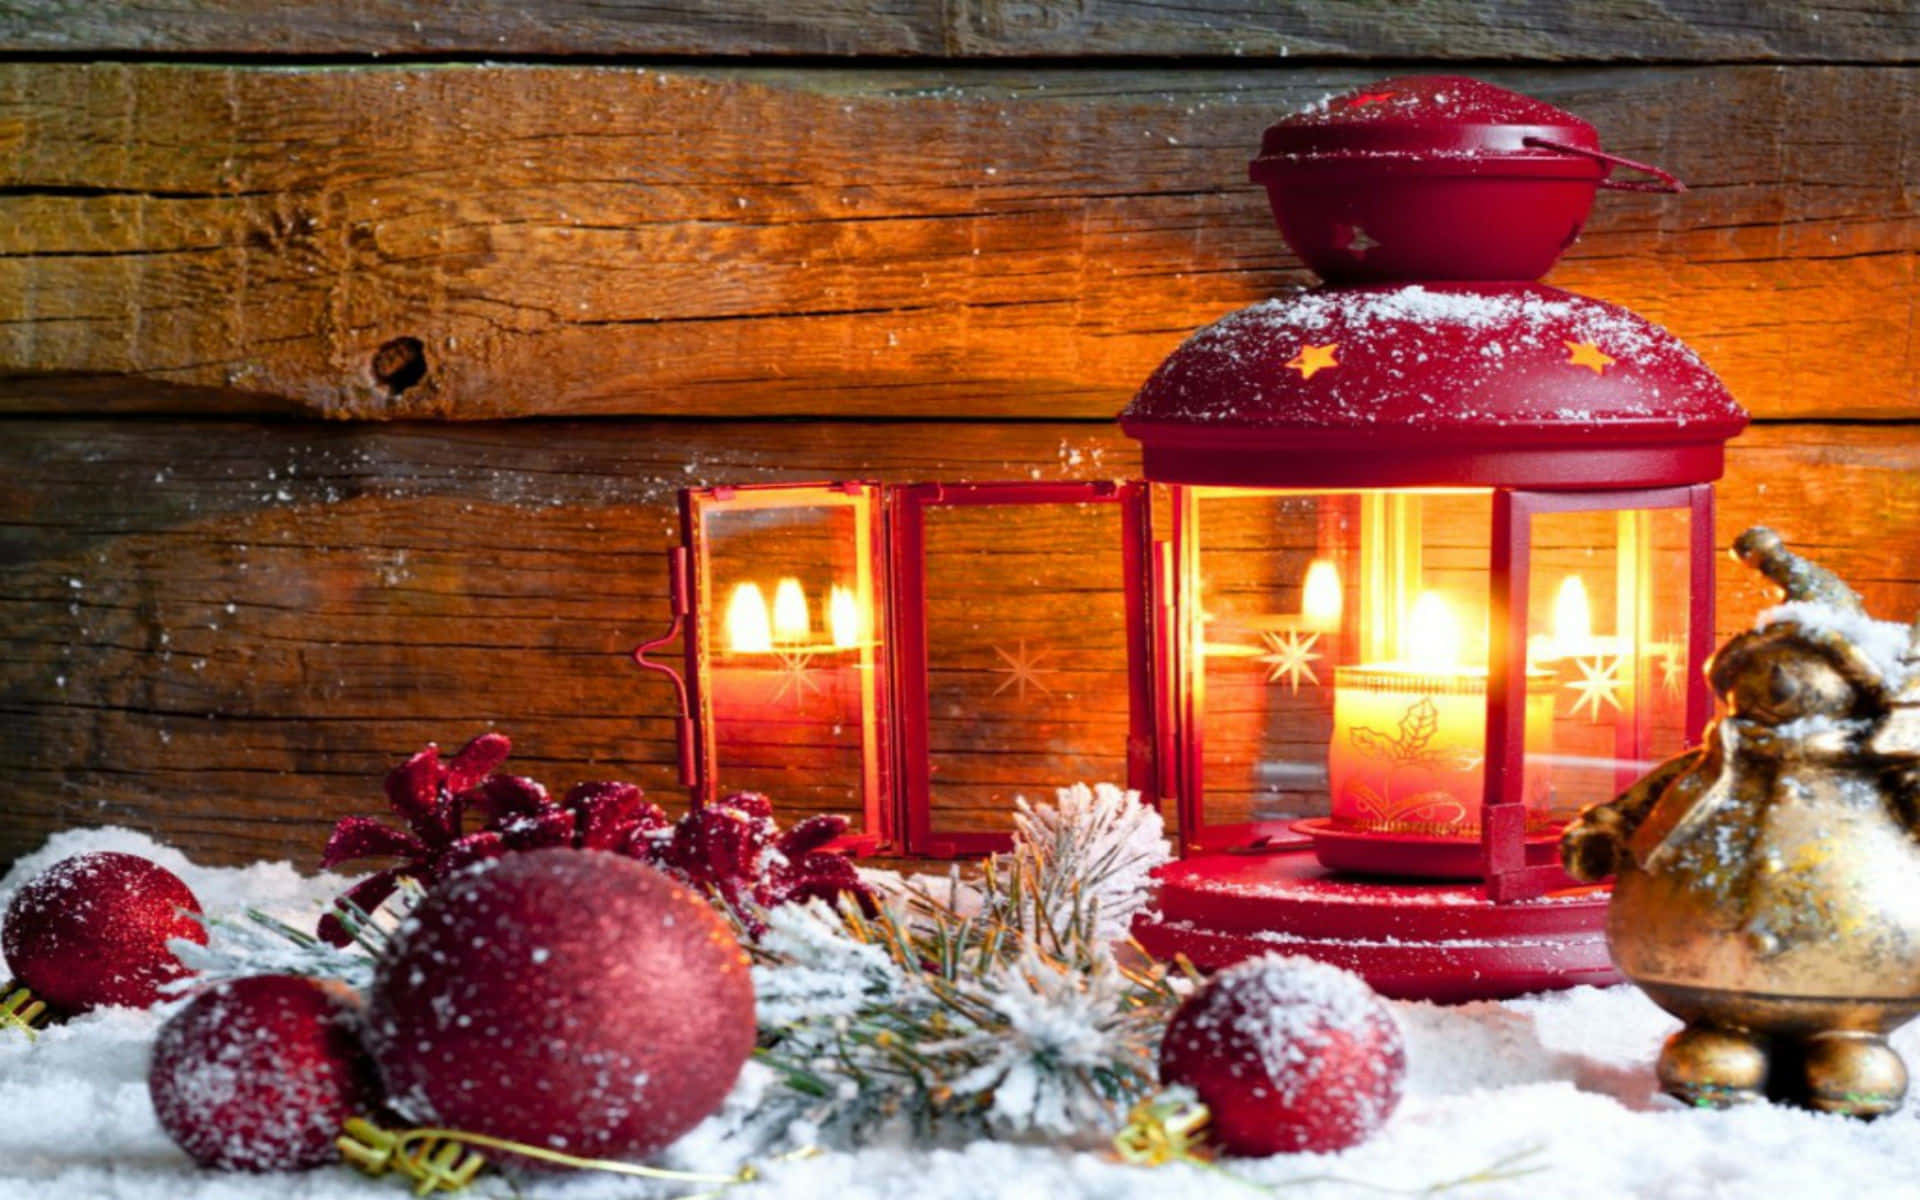 Spread holiday cheer with traditional vintage decorations this Christmas